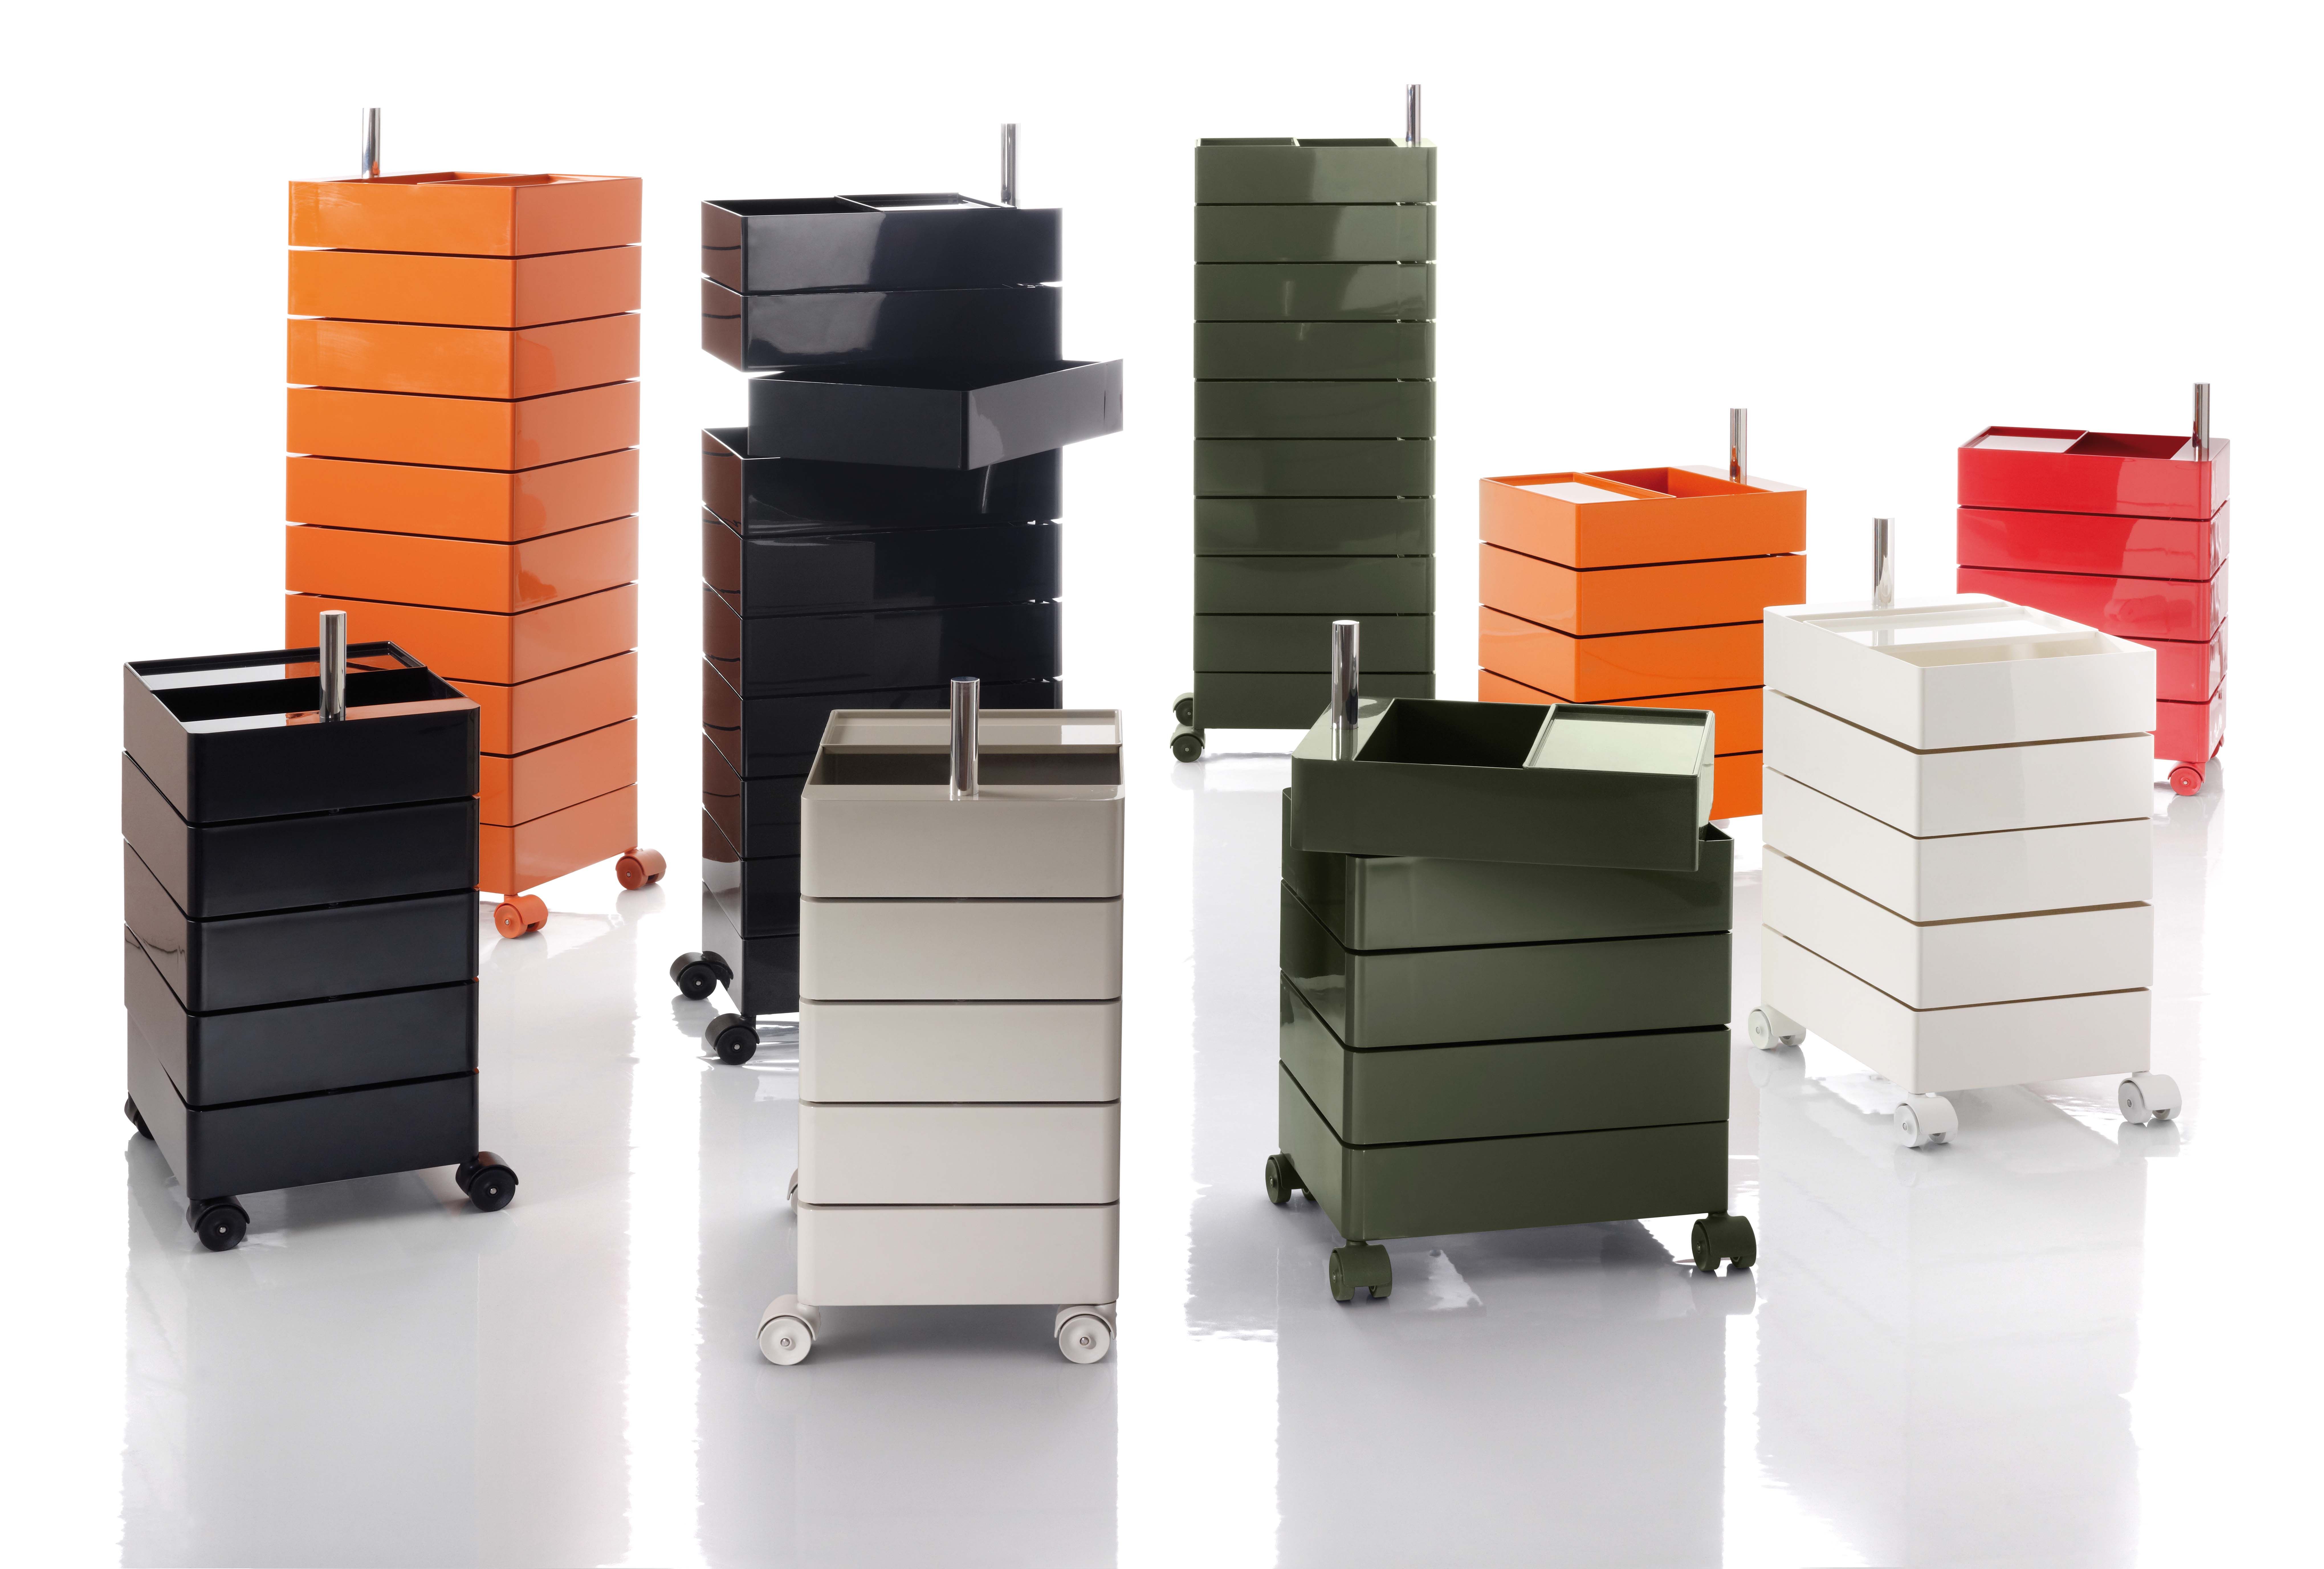 360 Mobile Container 5 Drawers Glossy Orange By Magis